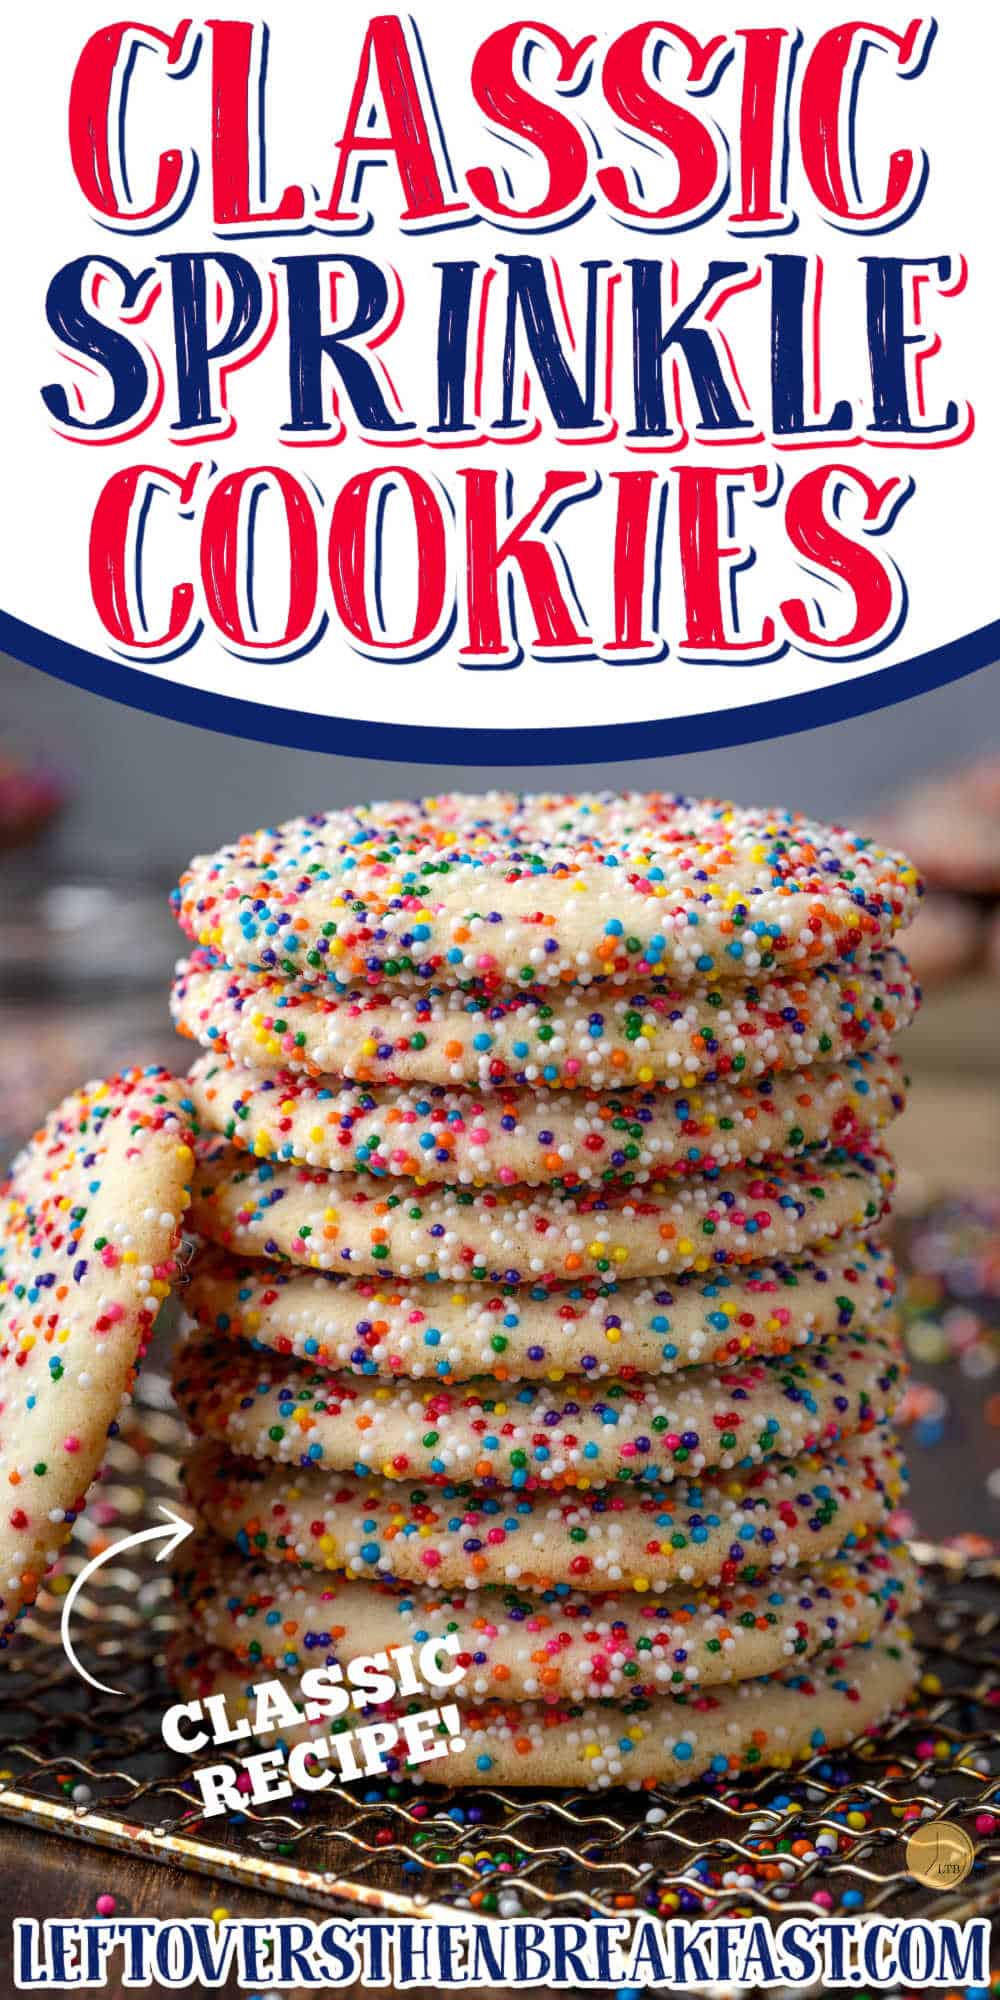 stack of cookies with text "classic sprinkle cookies"